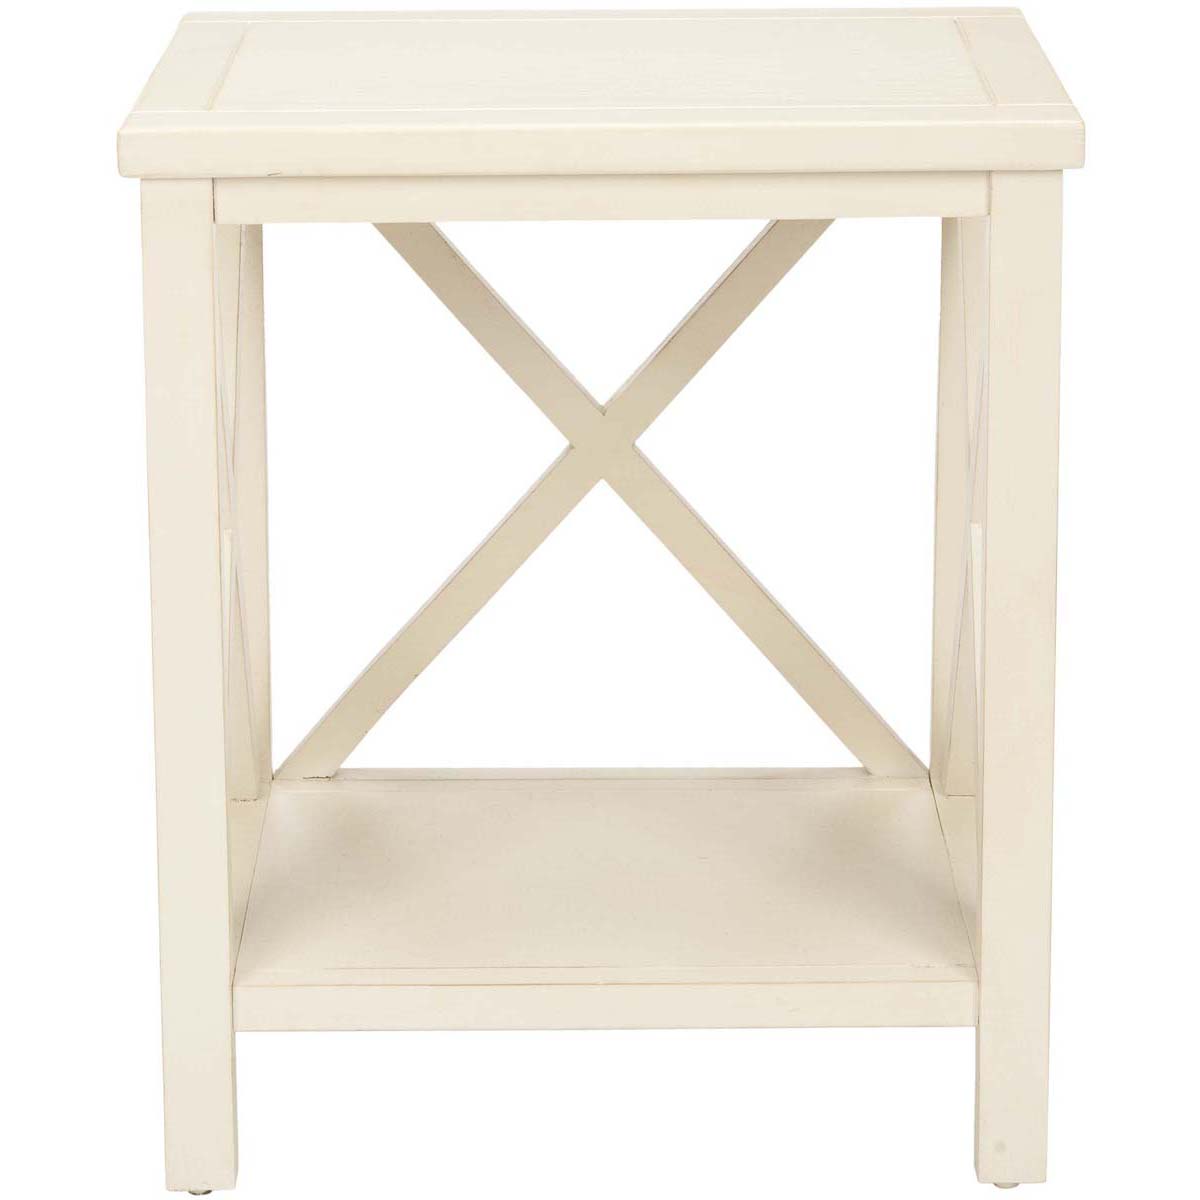 Safavieh Candence Cross Back End Table , AMH6523 - White